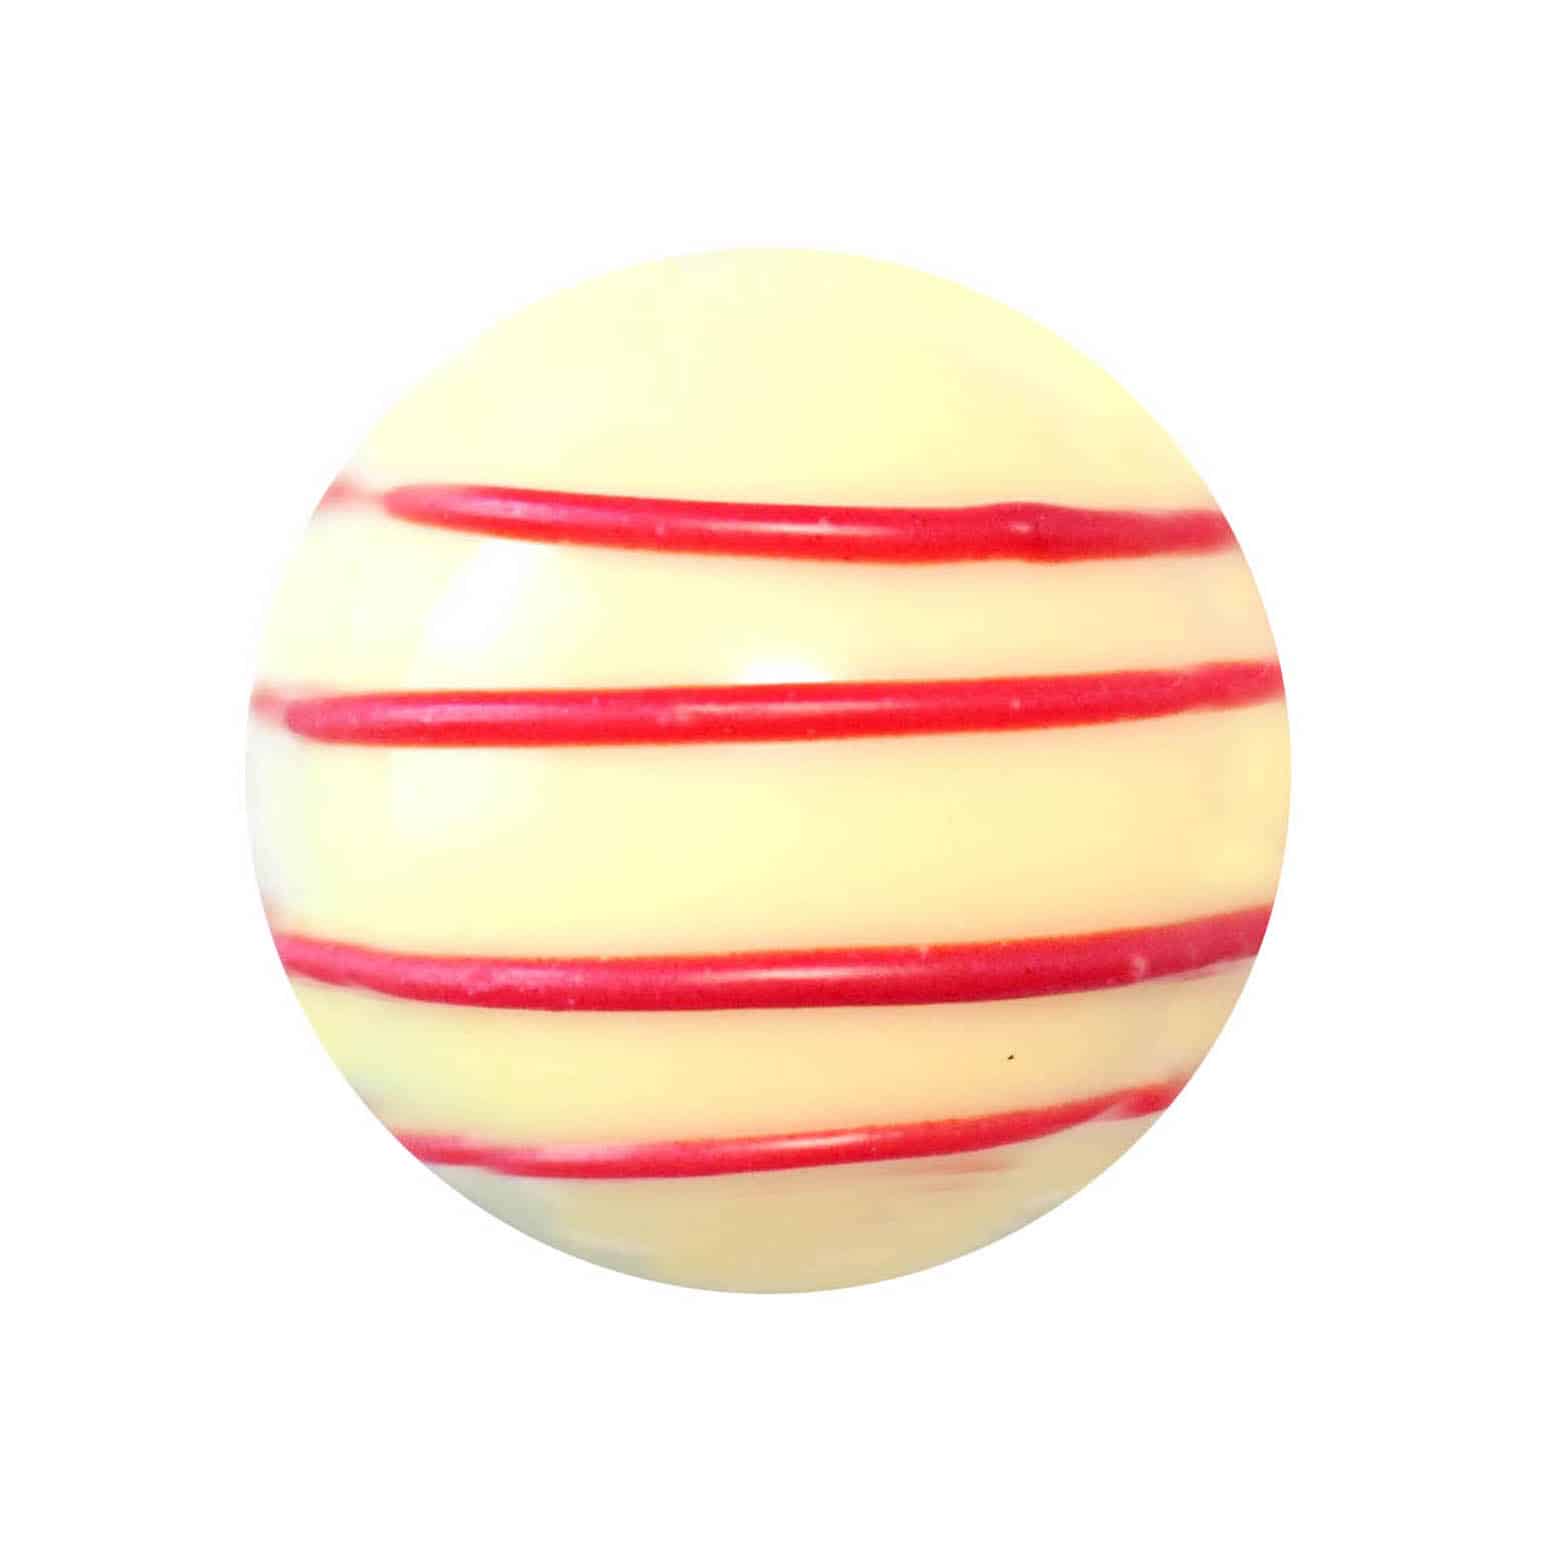 Overhead view of a cream-colored gourmet chocolate truffle with 4 red horizontal stripes; truffle tastes like white chocolate and raspberry